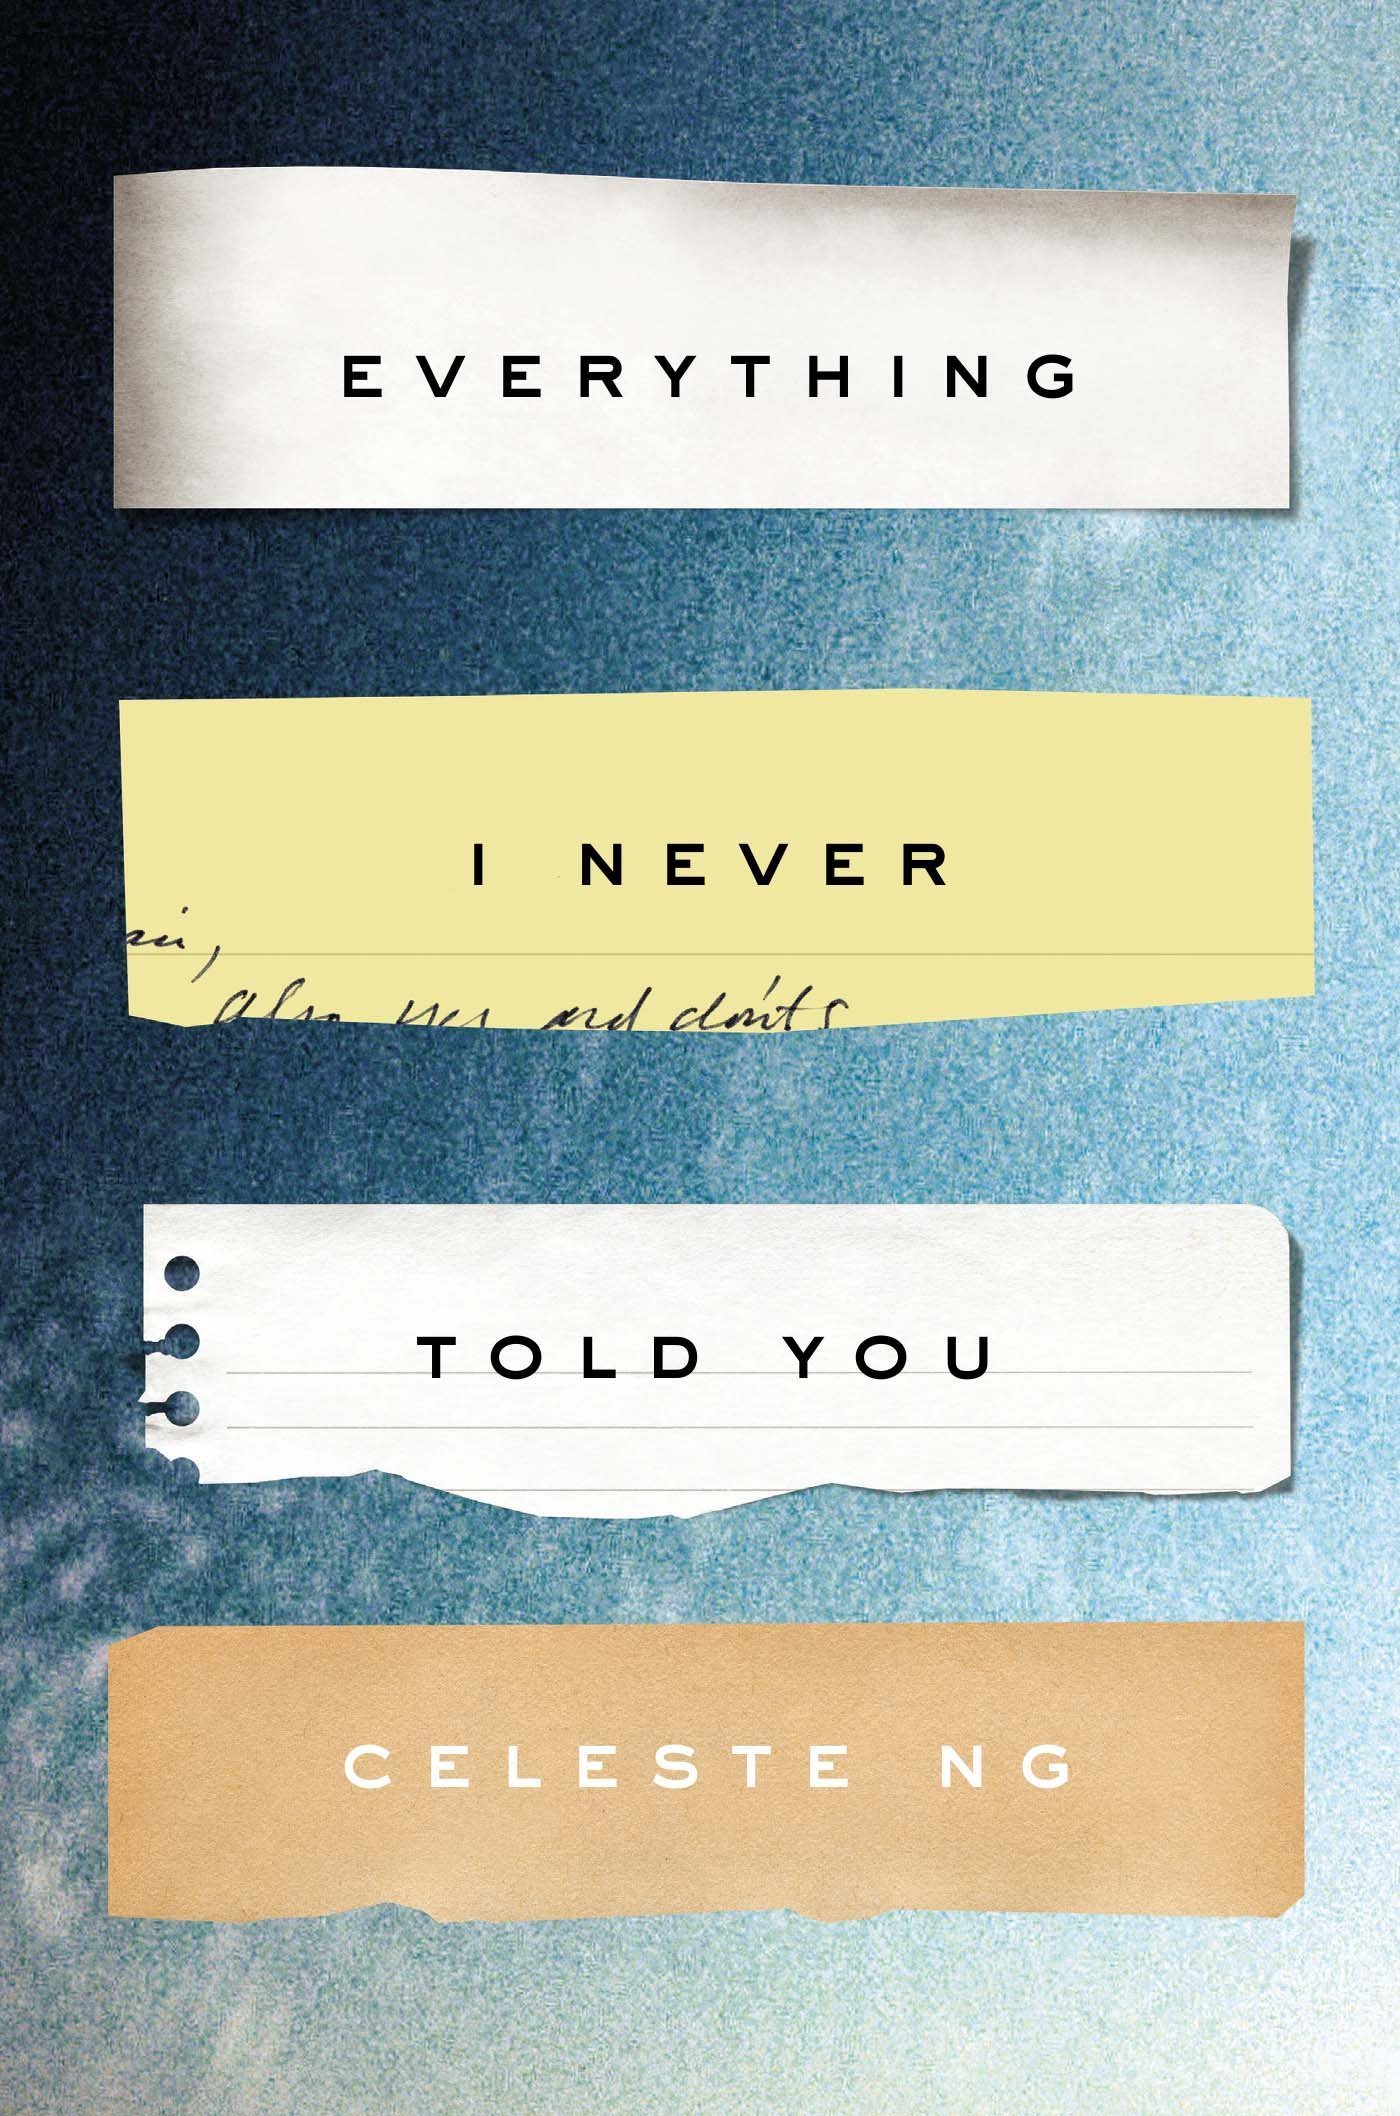 Image result for everything i never told you cover